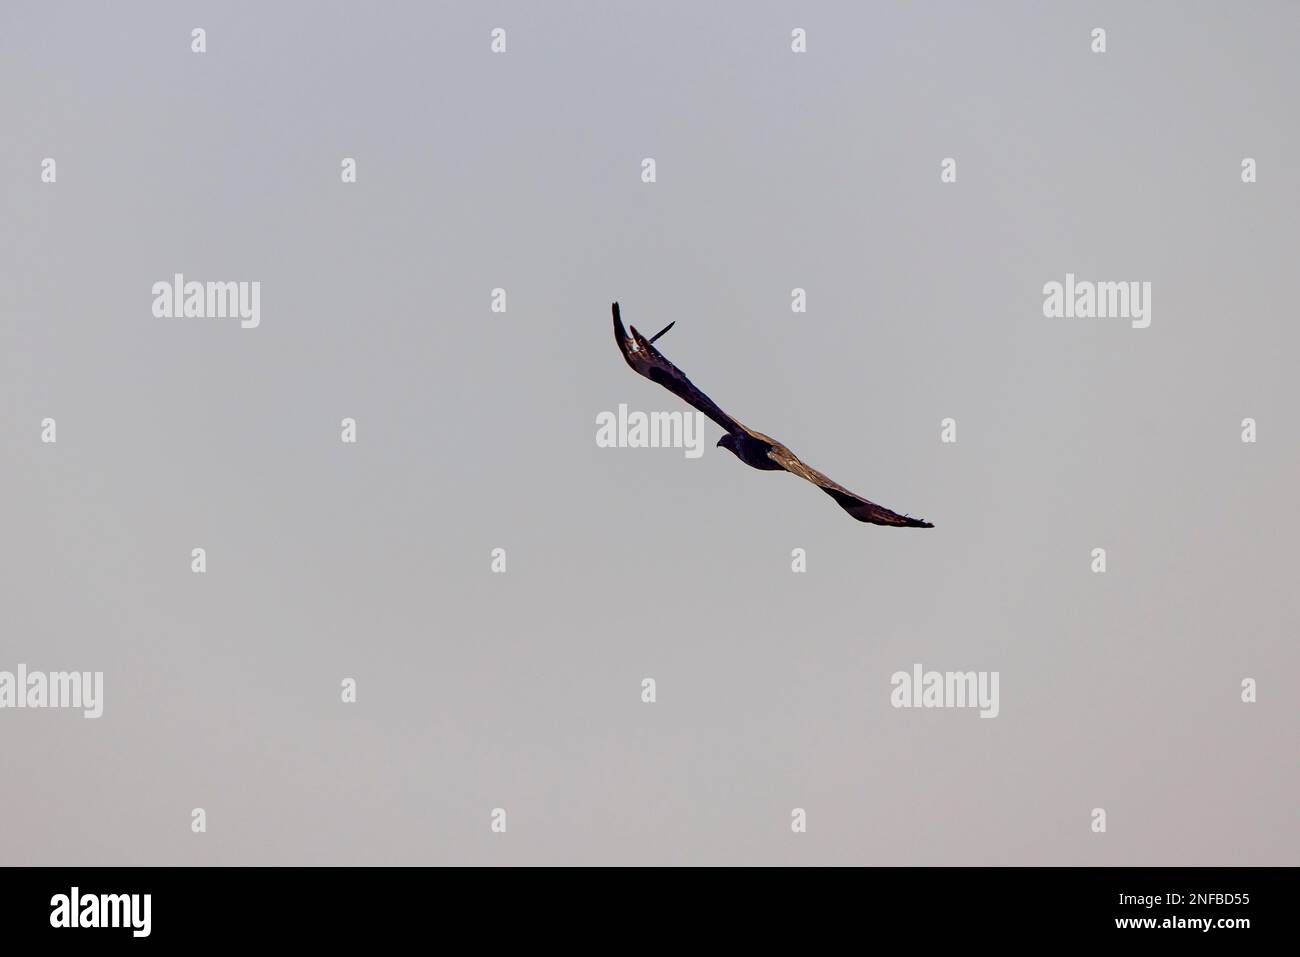 beautiful specimen of eagle on the background of the blue sky Stock Photo